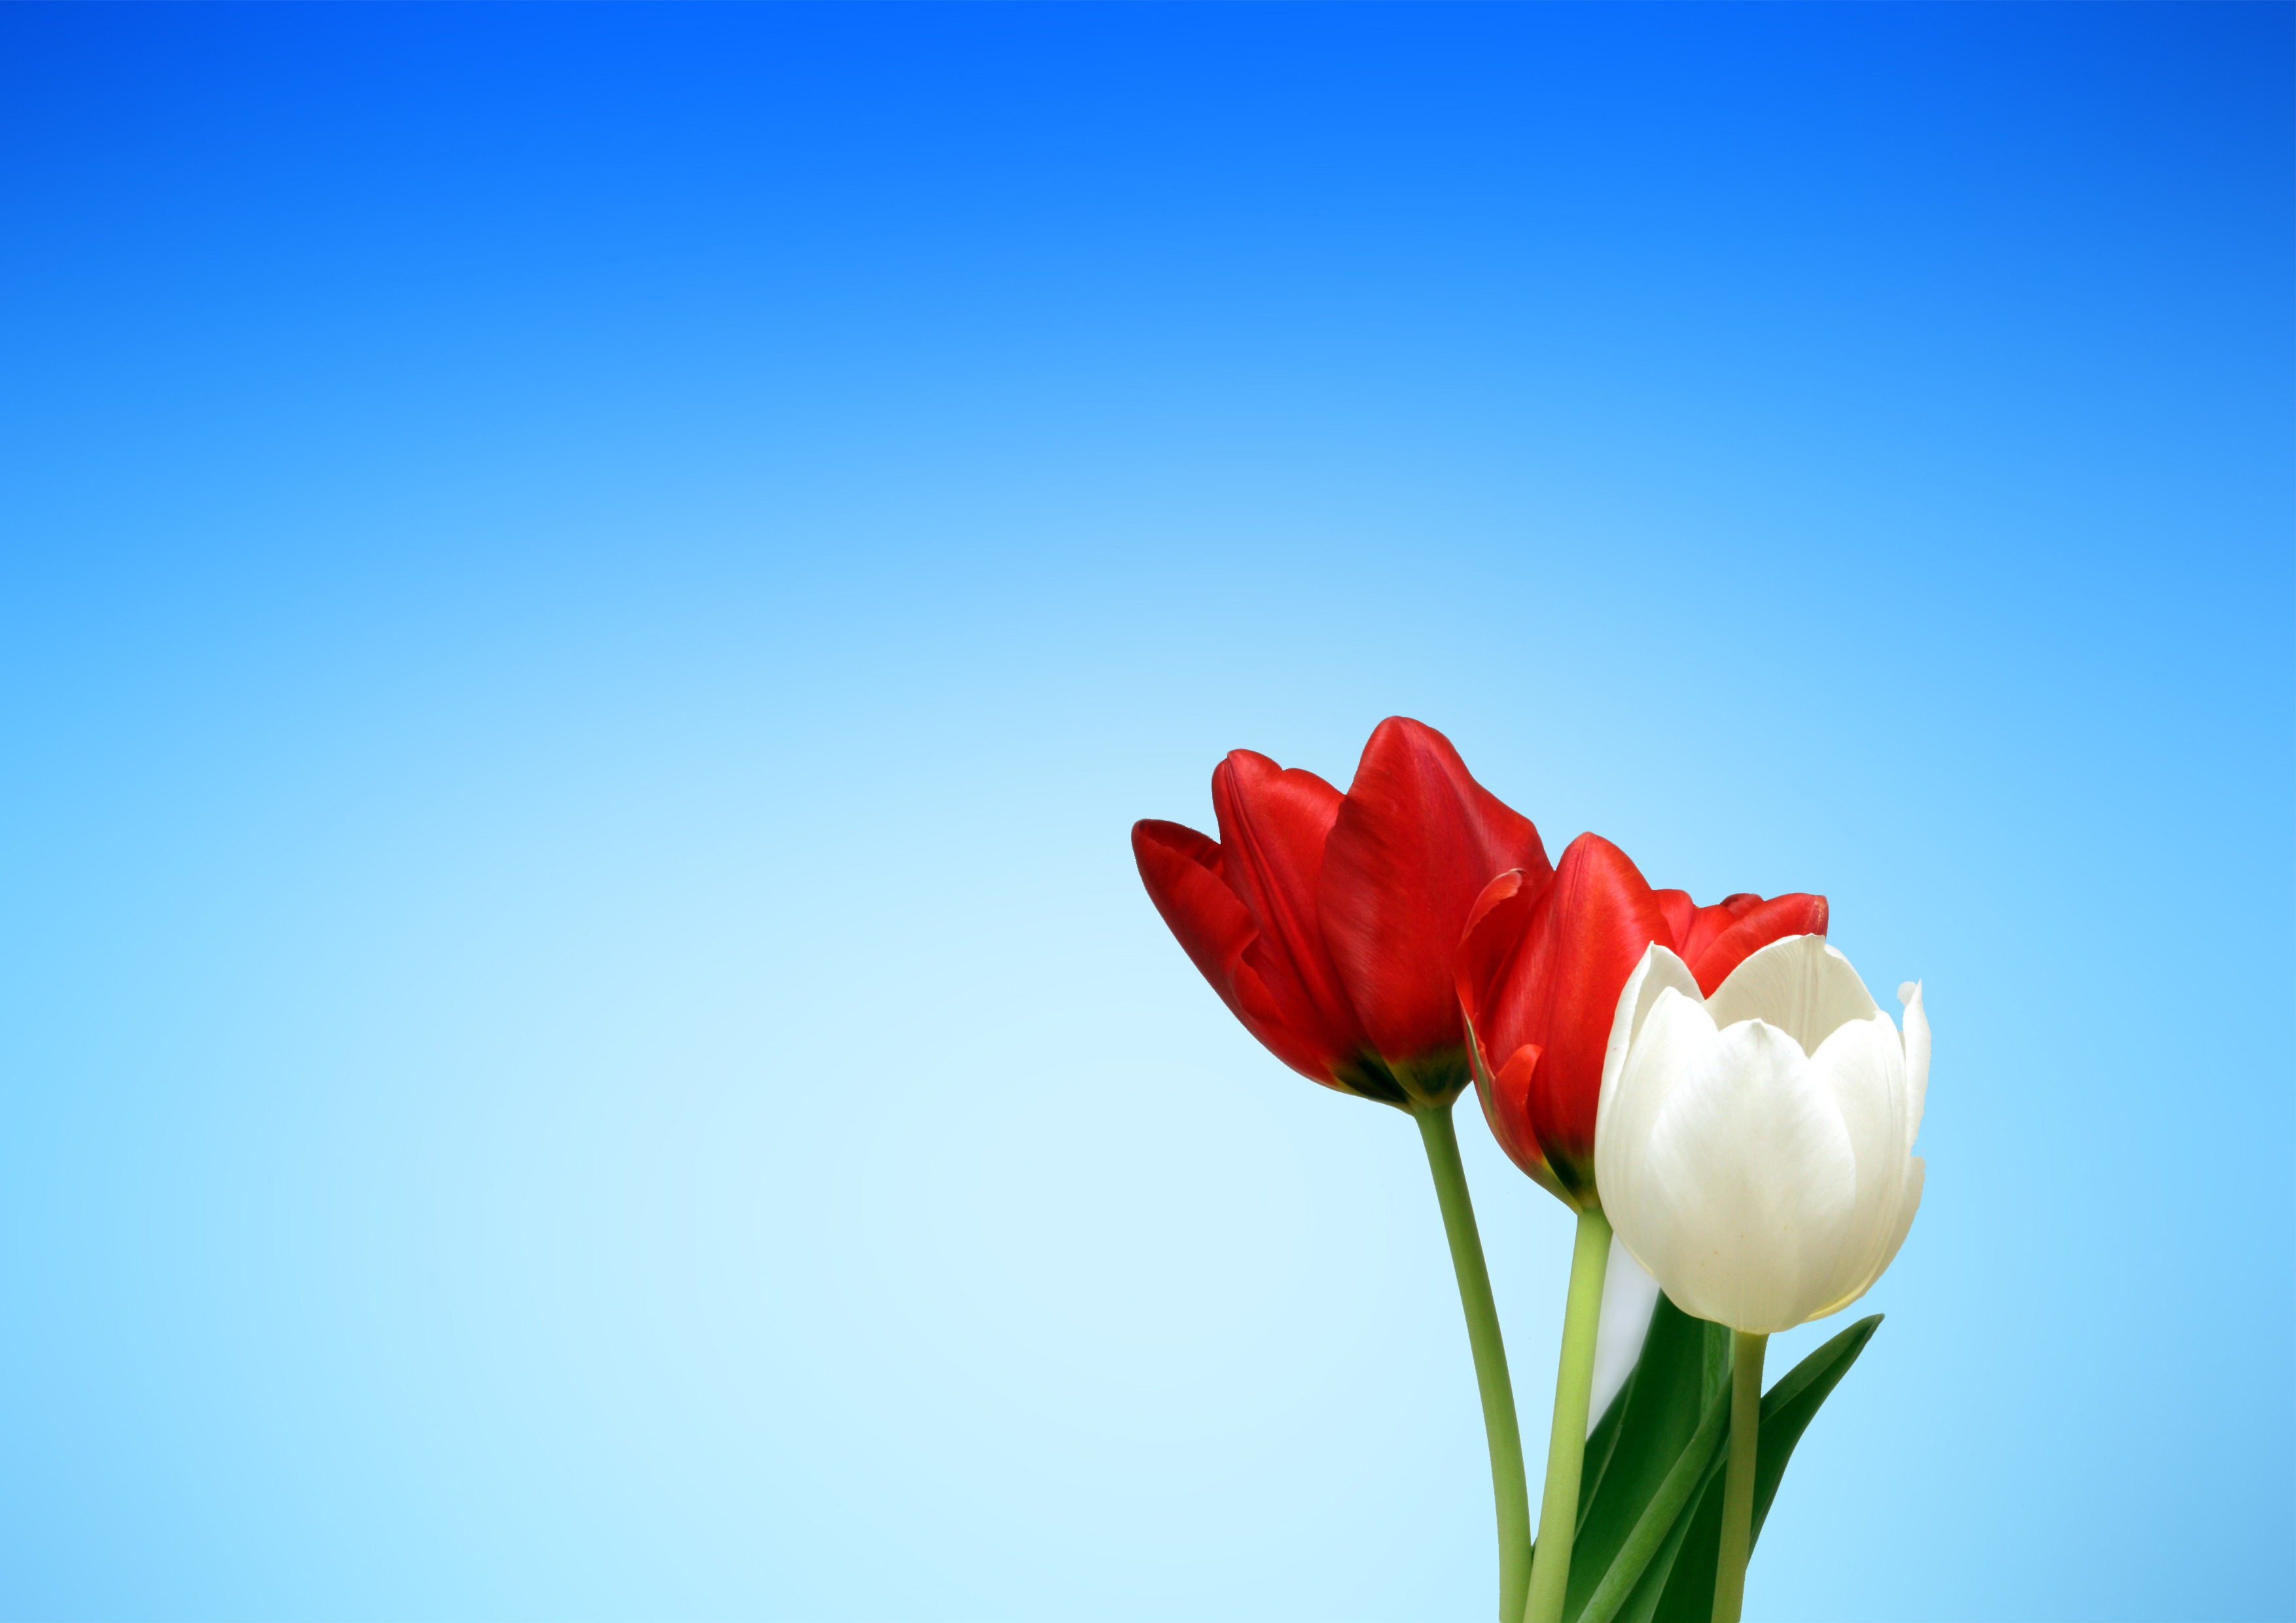 A red and white tulip in front of blue background - Tulip